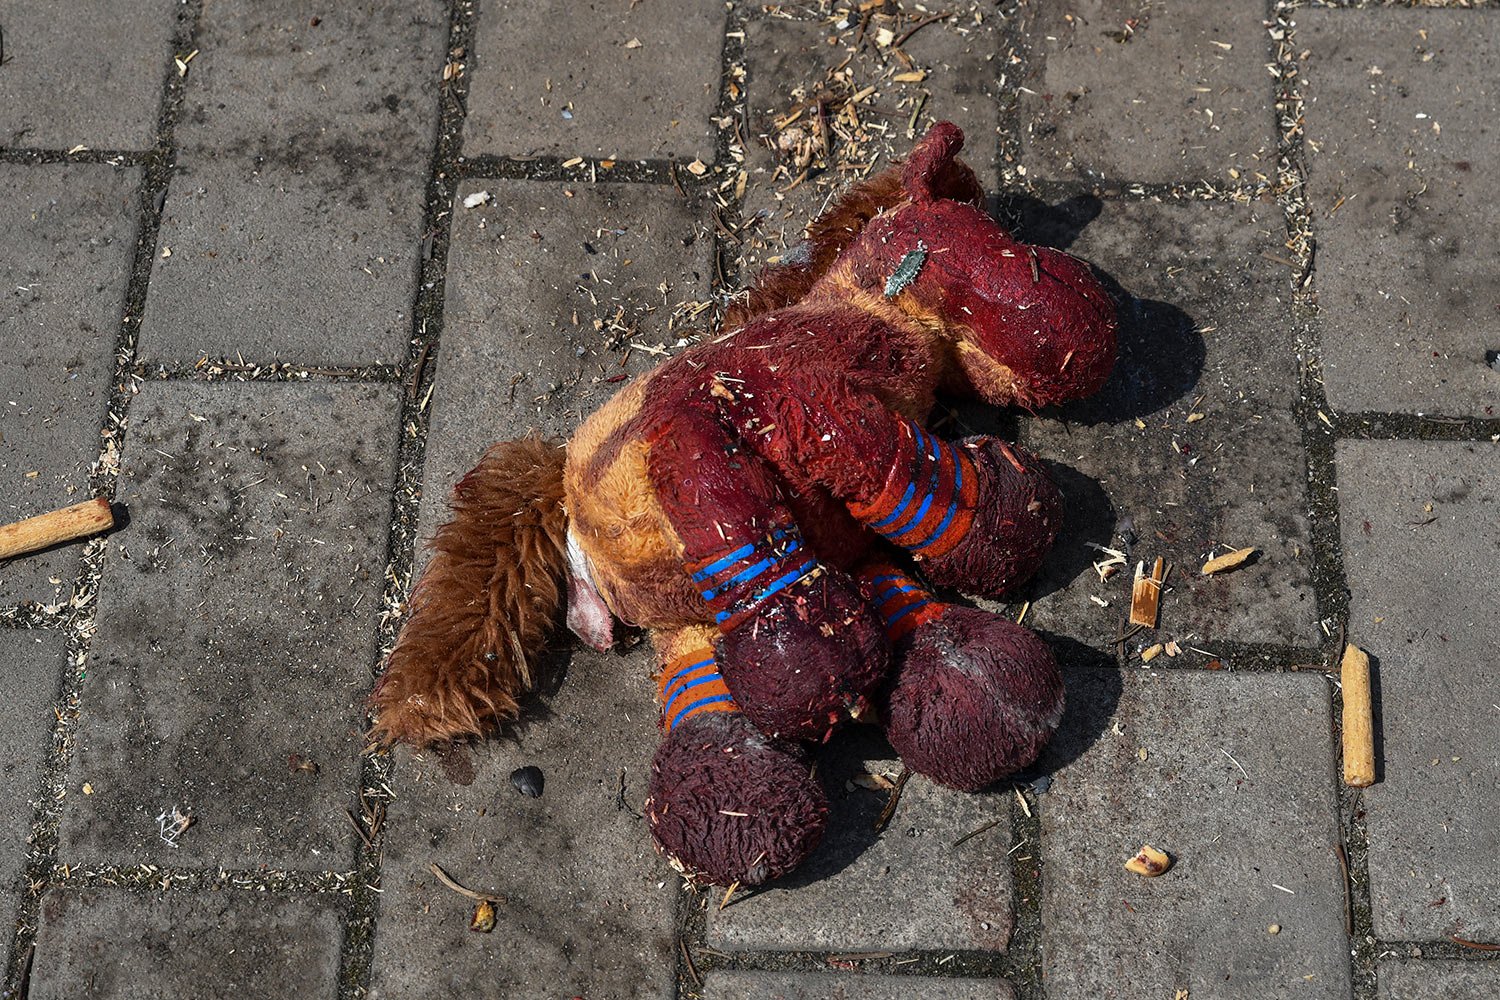  A stuffed horse with bloodstains on it lies on a platform after Russian shelling at the railway station in Kramatorsk, Ukraine, Friday, April 8, 2022. Hours after warning that Ukraine's forces already had found worse scenes of brutality in a settlem